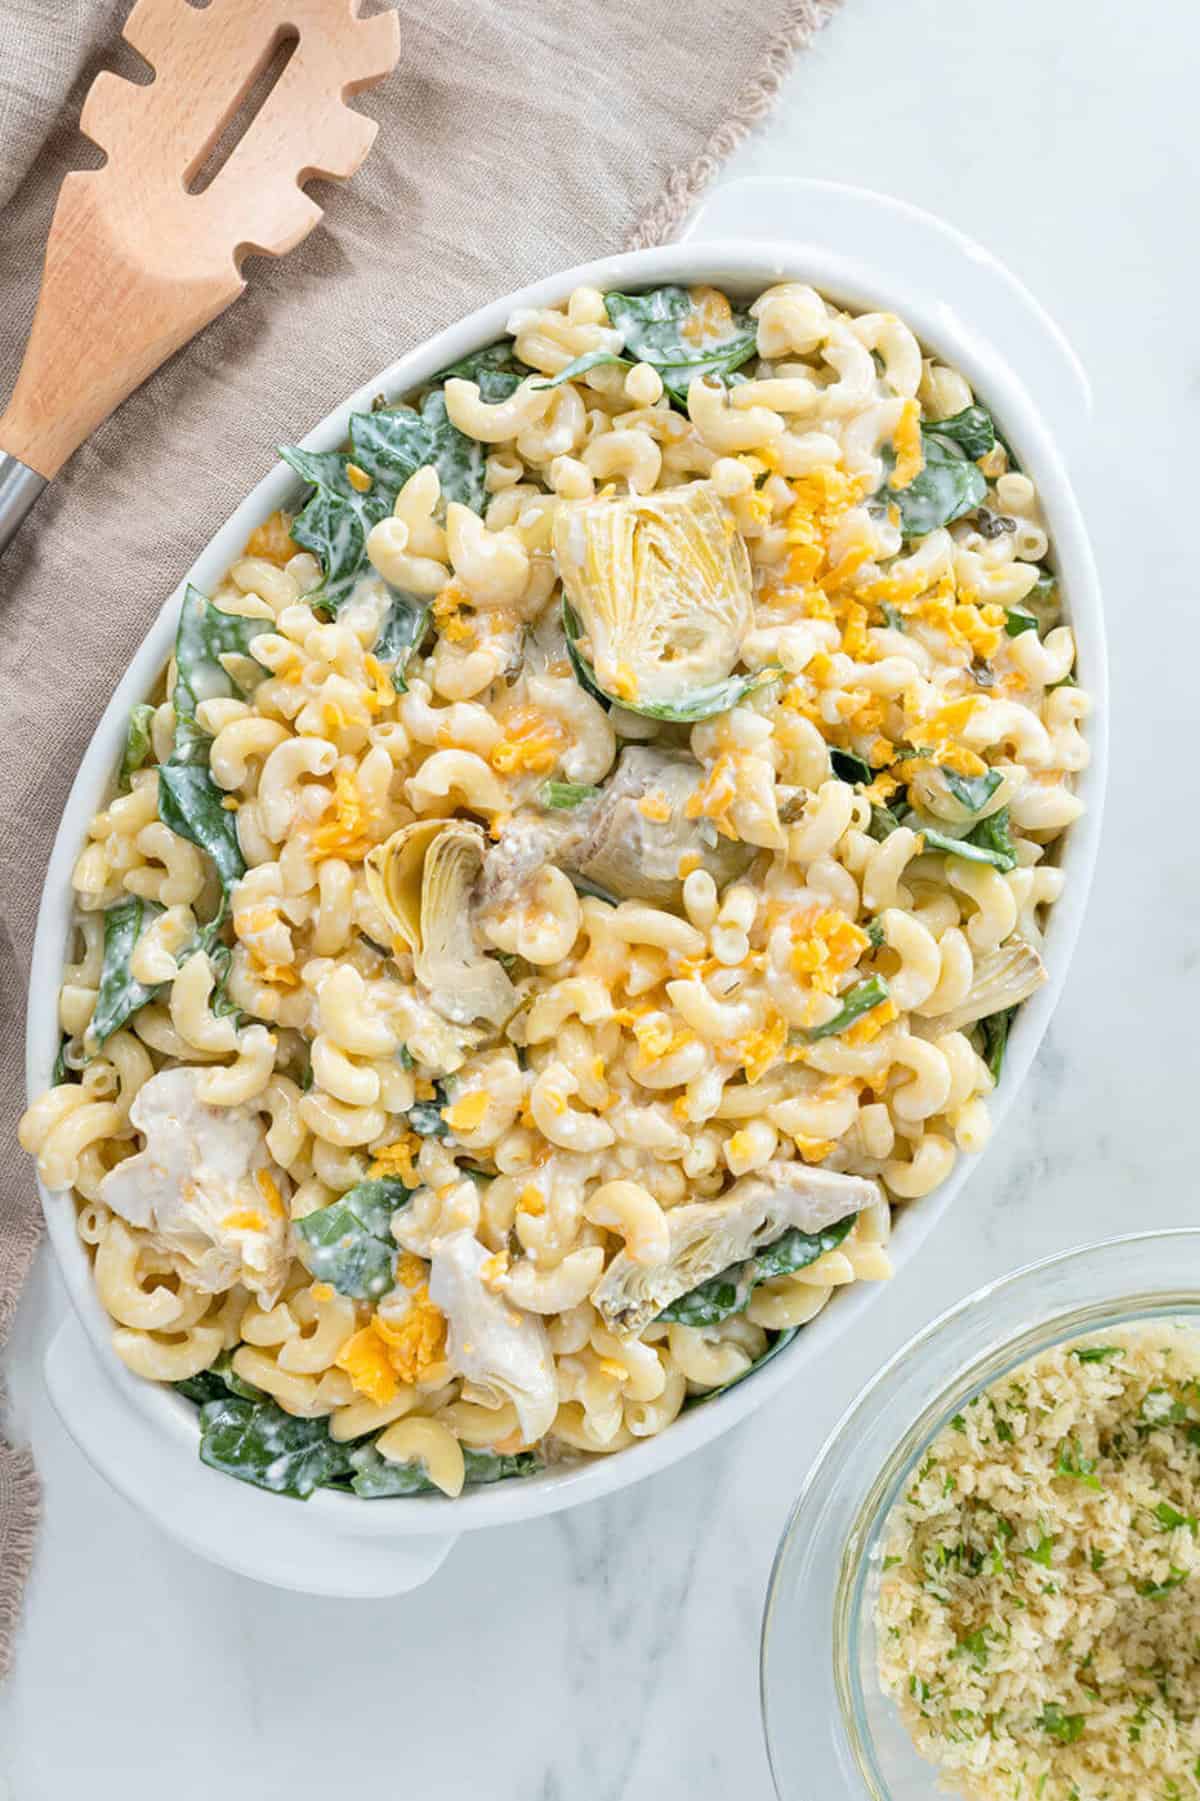 spinach and cheese mixed with pasta.